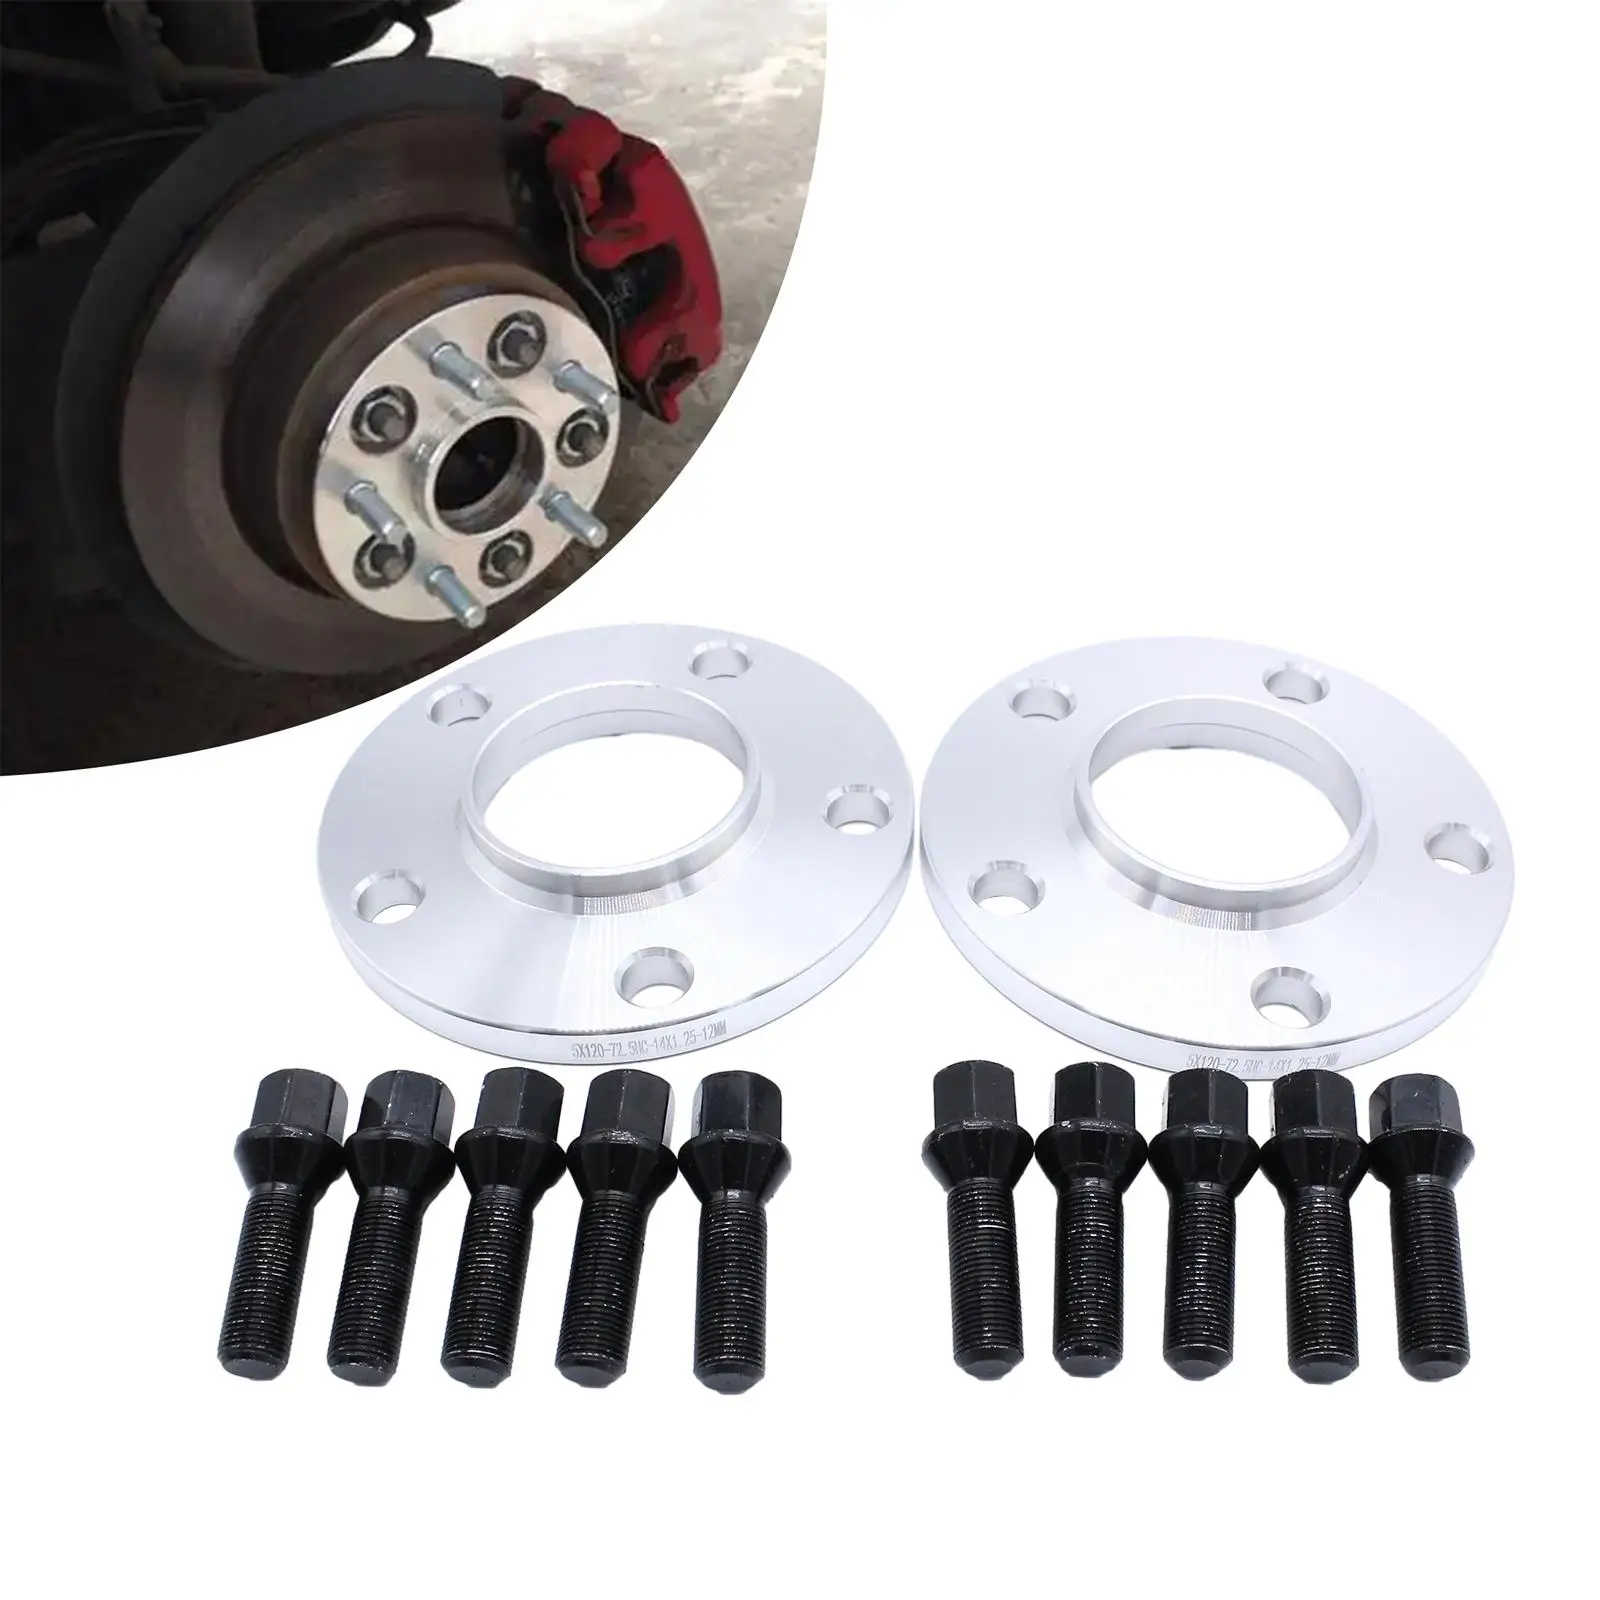 2 Pieces Wheel Spacers Repair Parts Center Bore 72.5mm for Ford Ranger